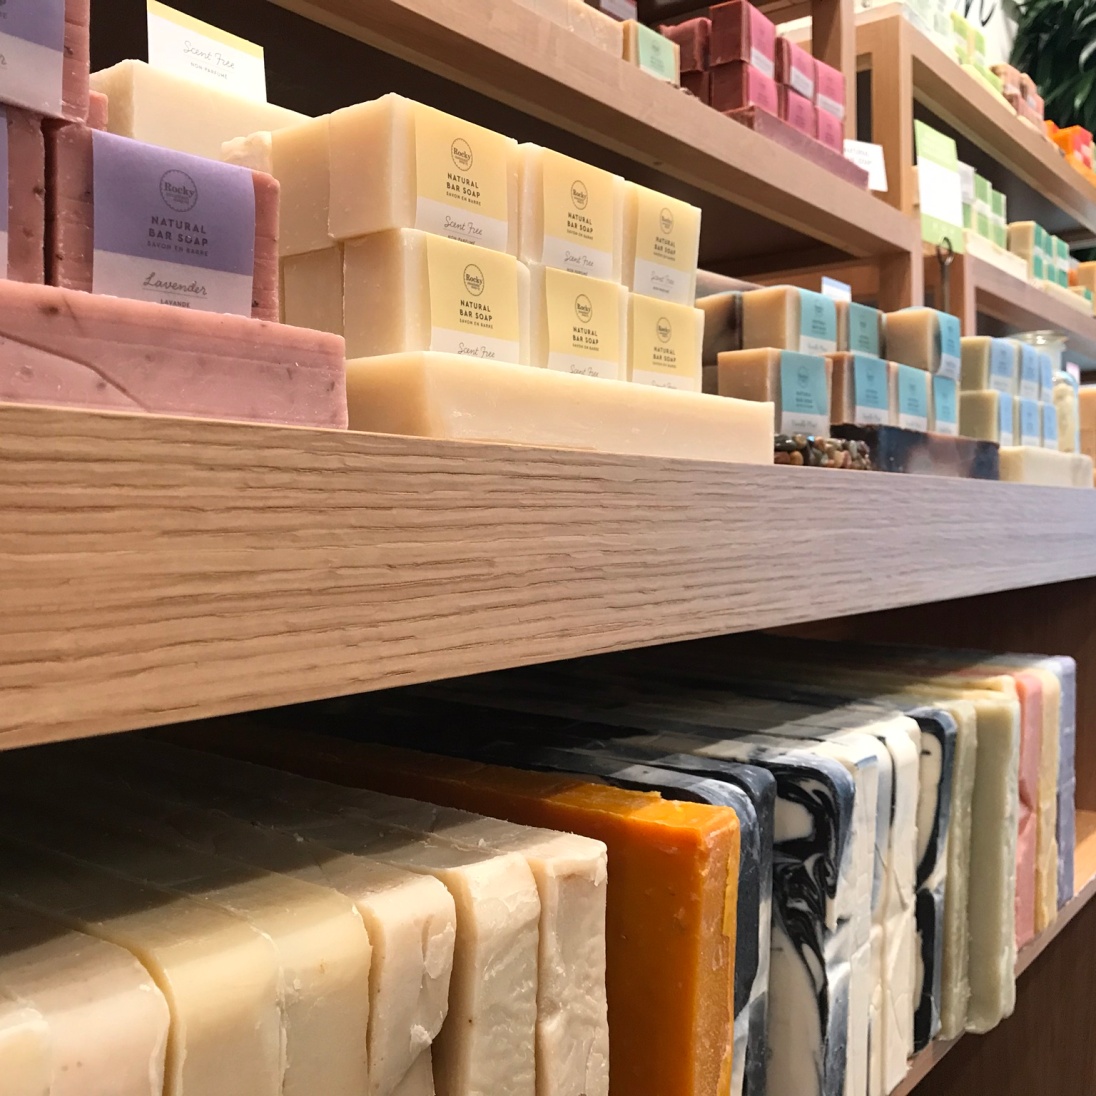 So many soaps. So little time.